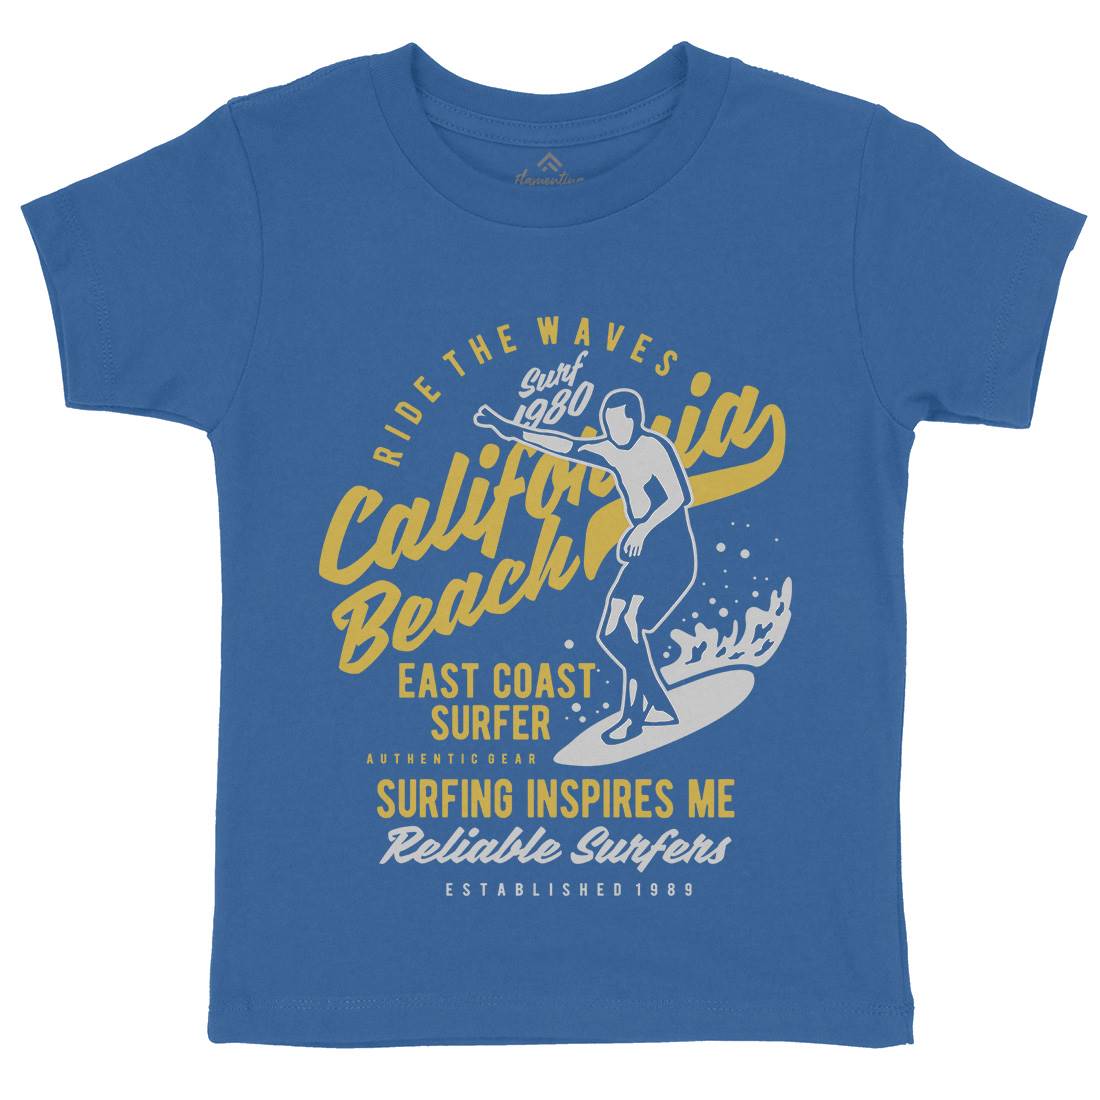 Ride The Waves In California Kids Crew Neck T-Shirt Surf B439